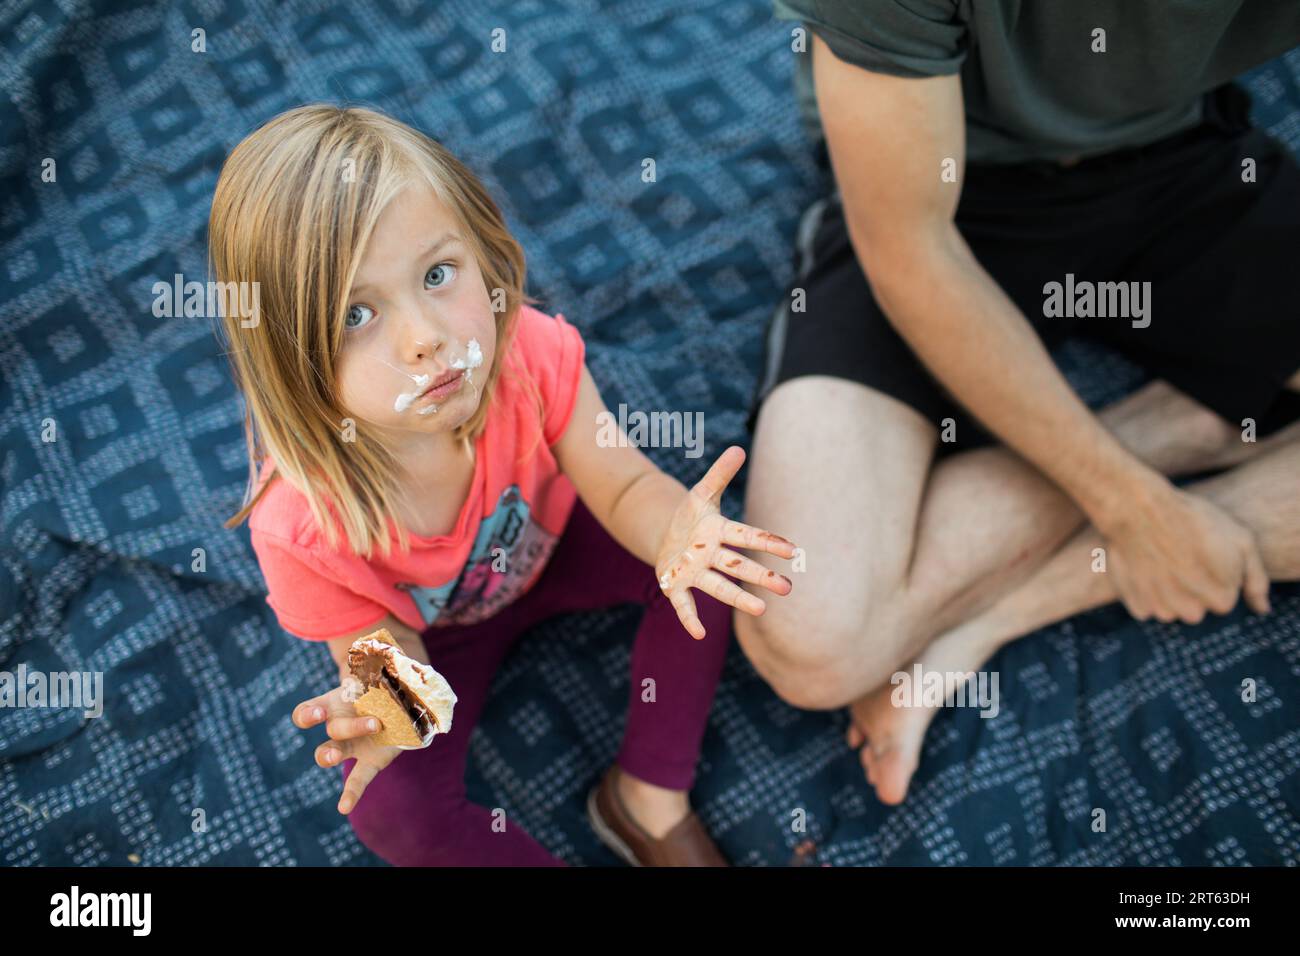 Toddler with face in s’mores on a blanket during their campfire. Stock Photo